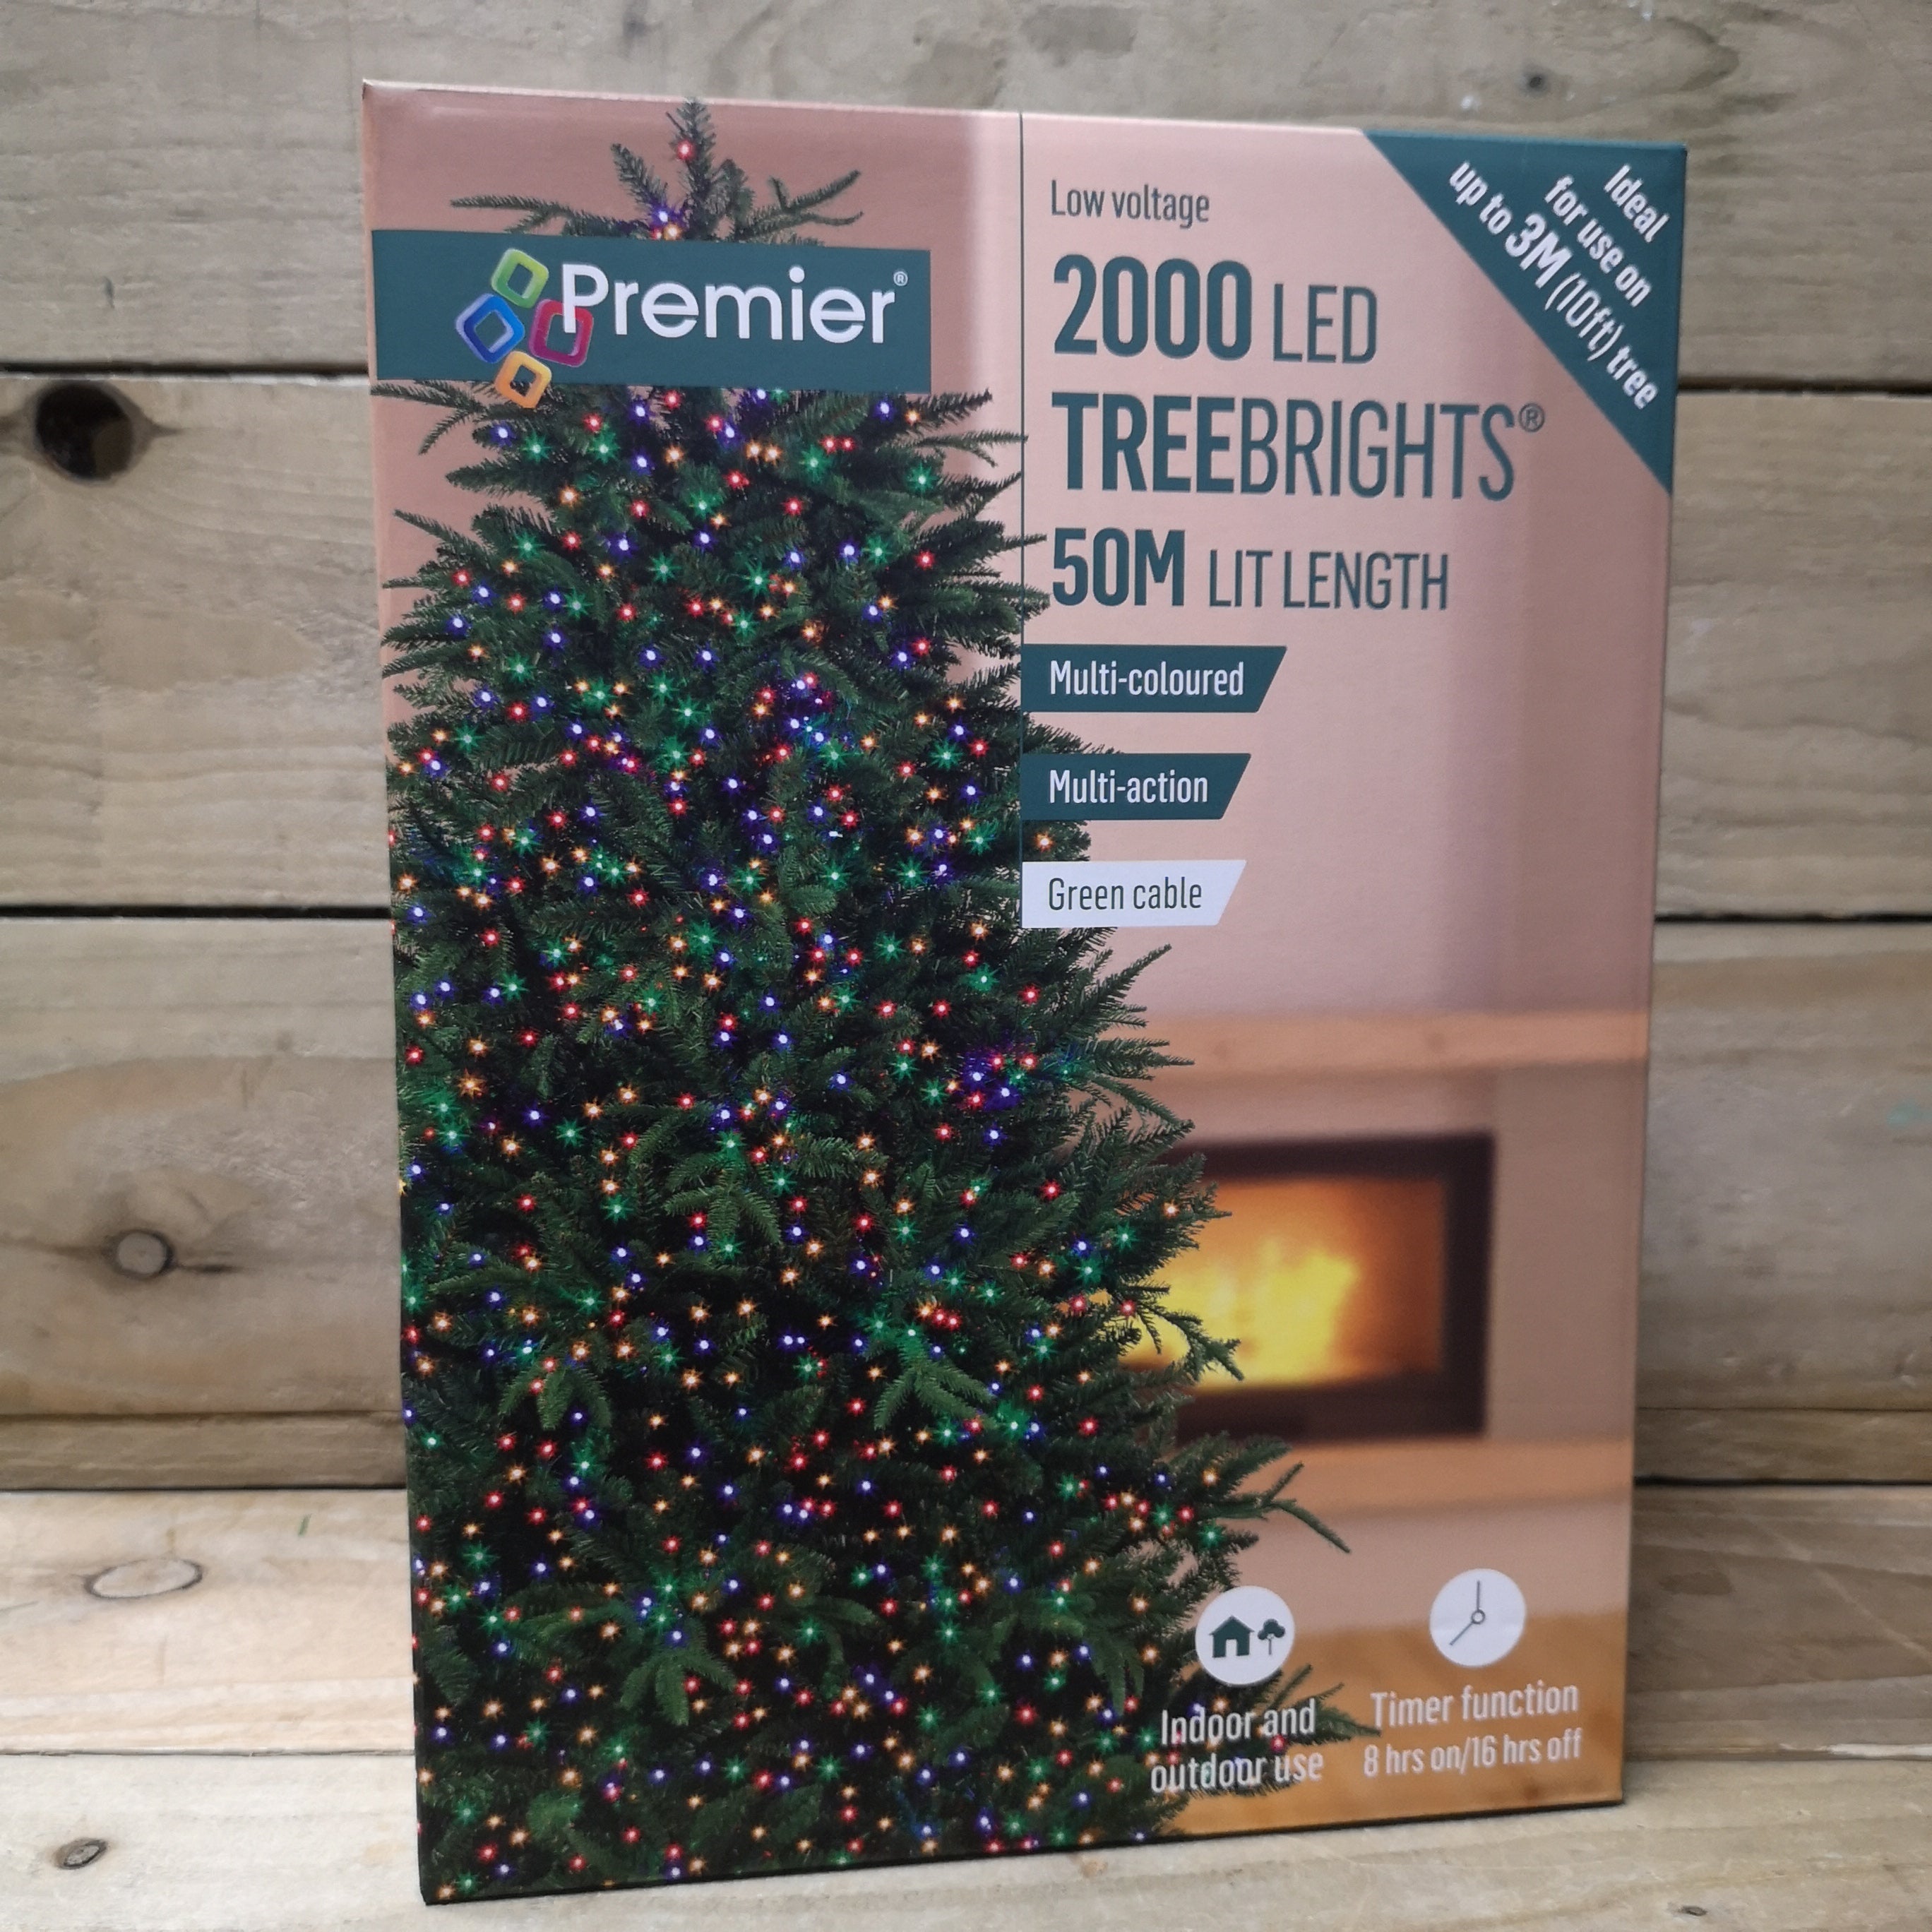 2000 LED 50m Premier TreeBrights Indoor Outdoor Christmas Multi Function Mains Operated String Lights with Timer in Multicoloured